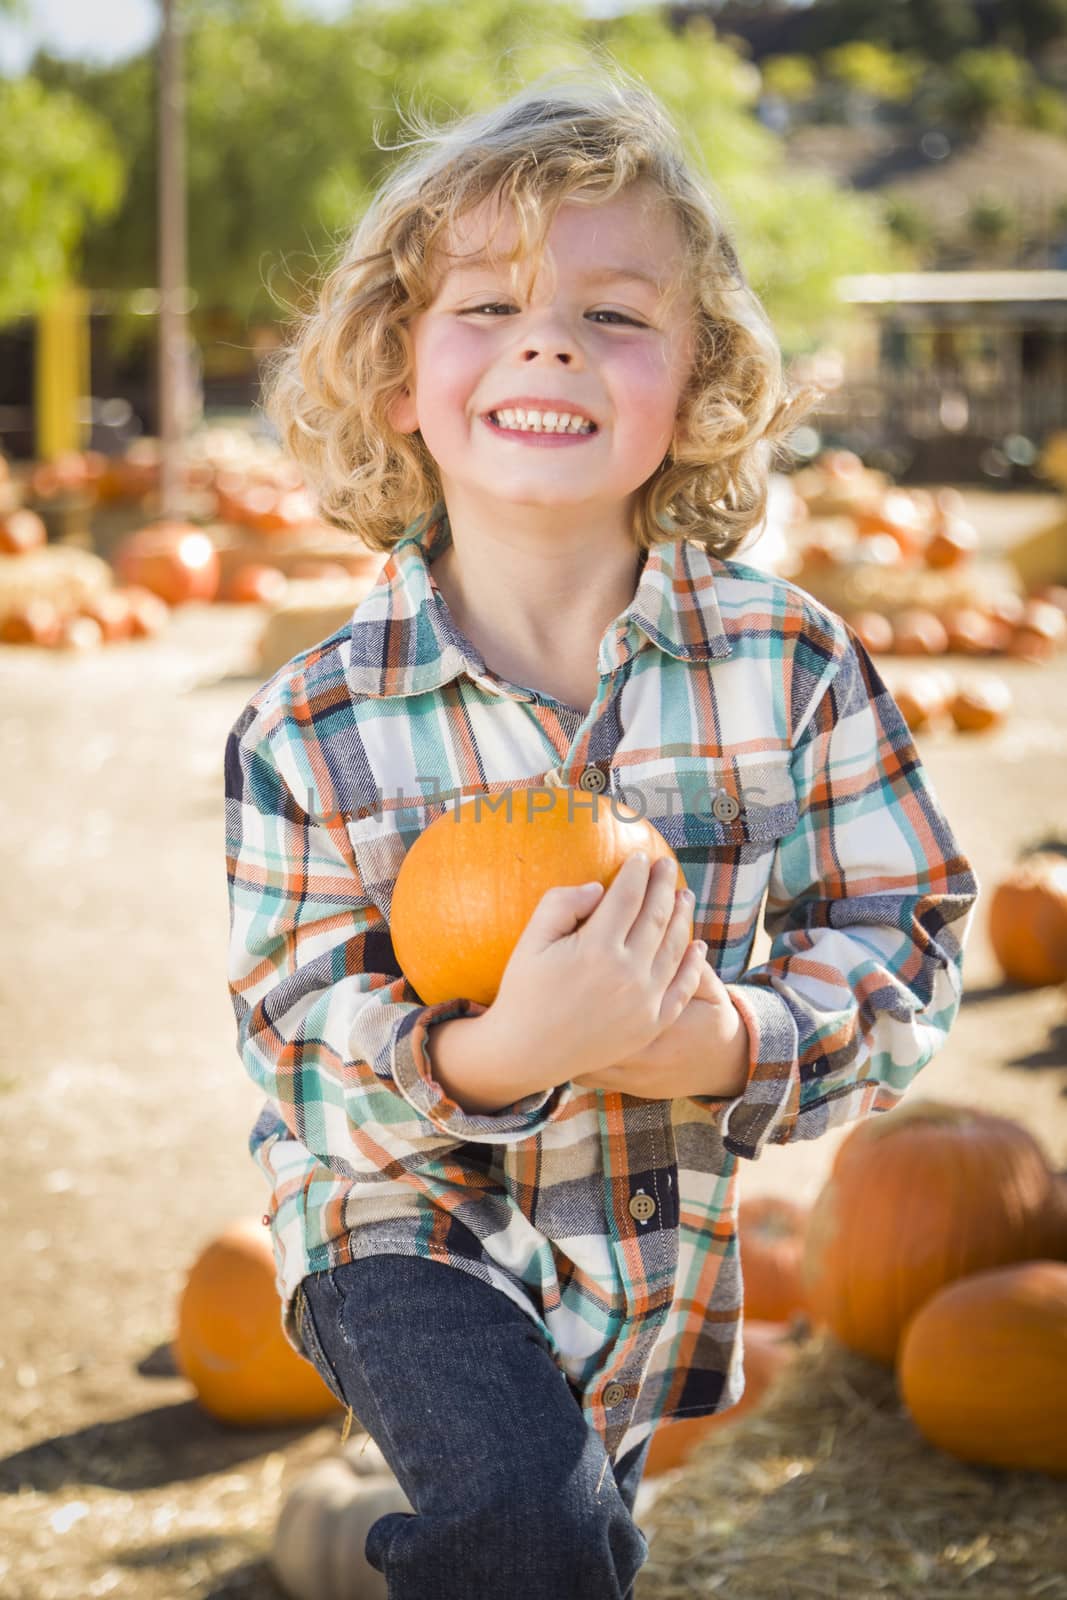 Little Boy Holding His Pumpkin at a Pumpkin Patch
 by Feverpitched